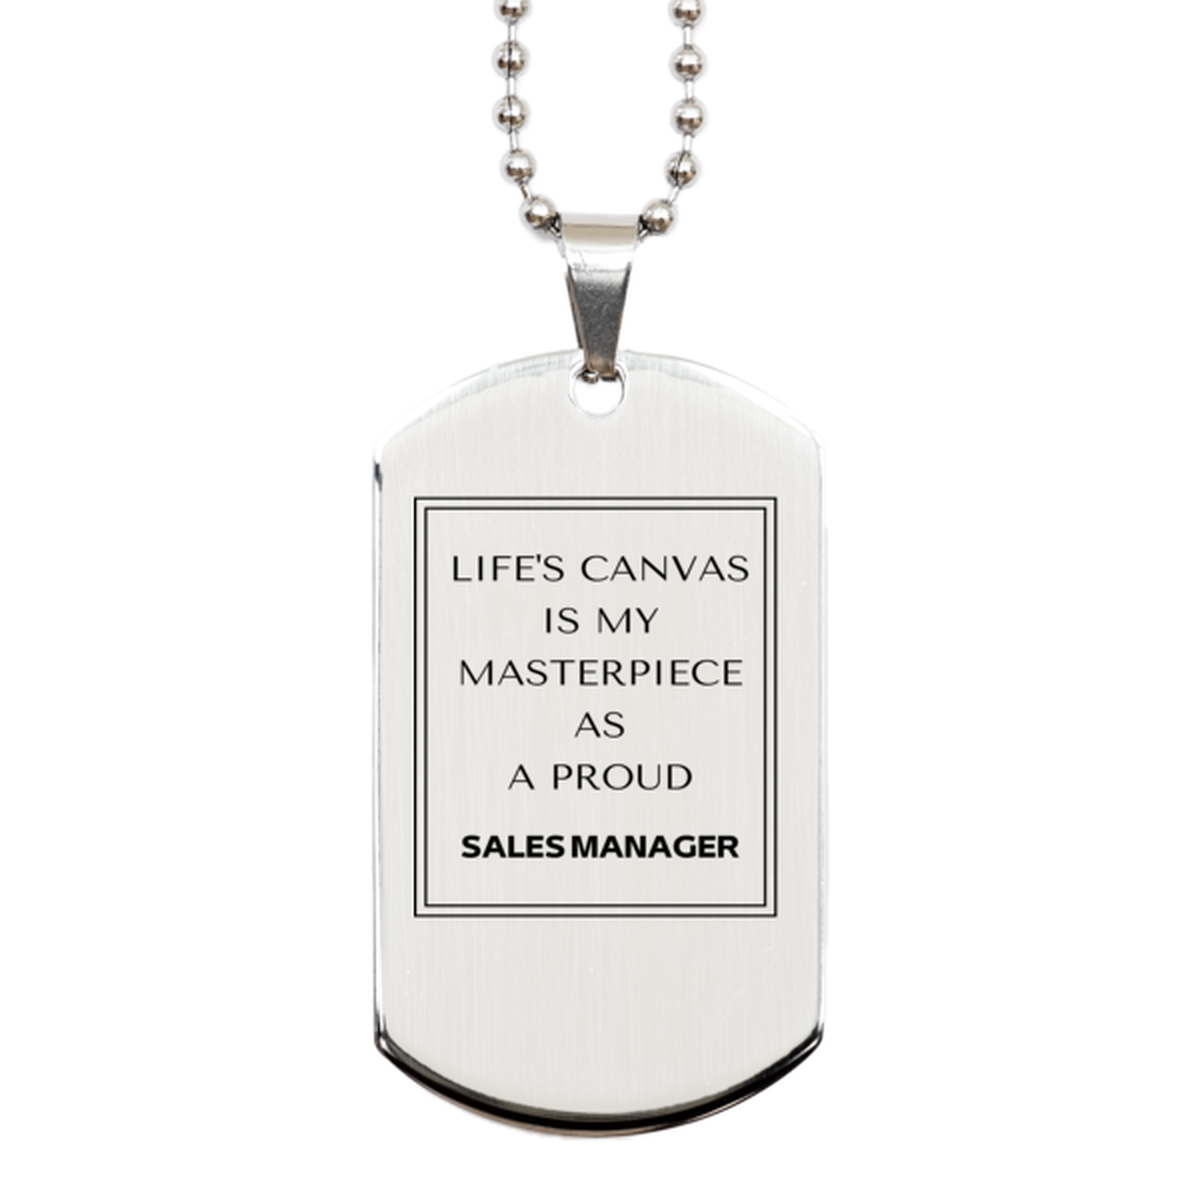 Proud Sales Manager Gifts, Life's canvas is my masterpiece, Epic Birthday Christmas Unique Silver Dog Tag For Sales Manager, Coworkers, Men, Women, Friends